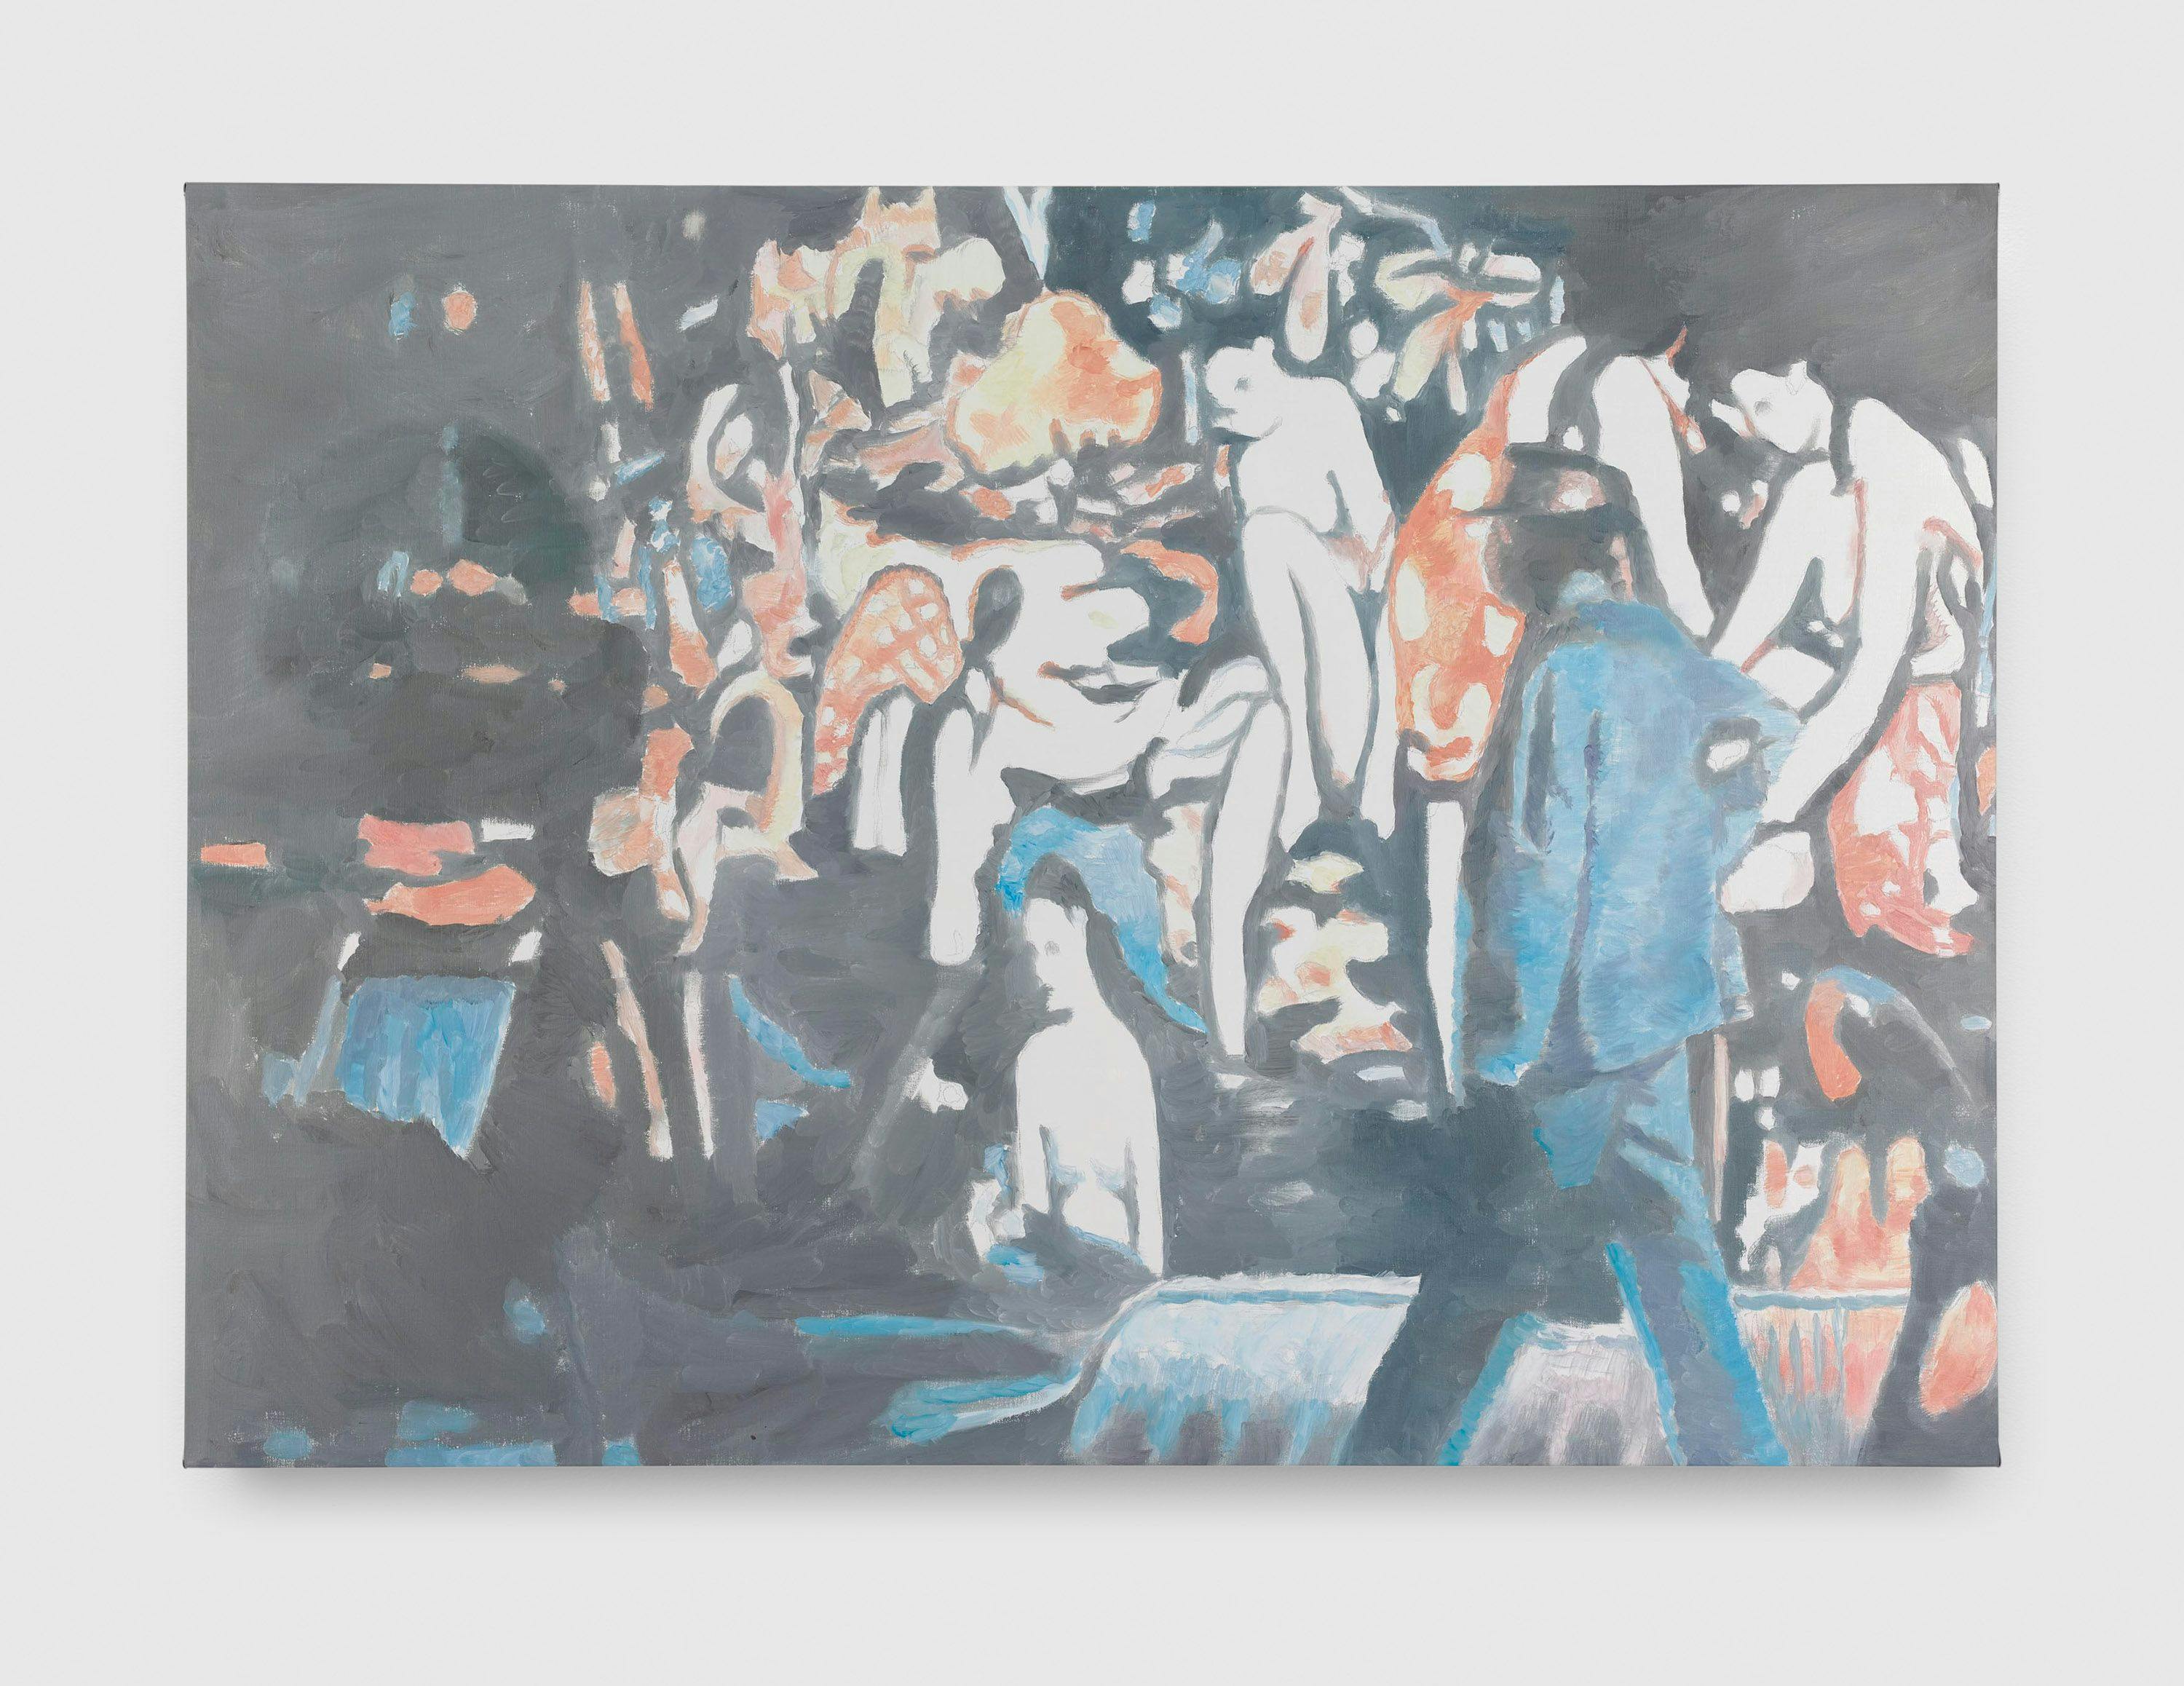 A painting by Luc Tuymans, titled Allo!, dated 2011.